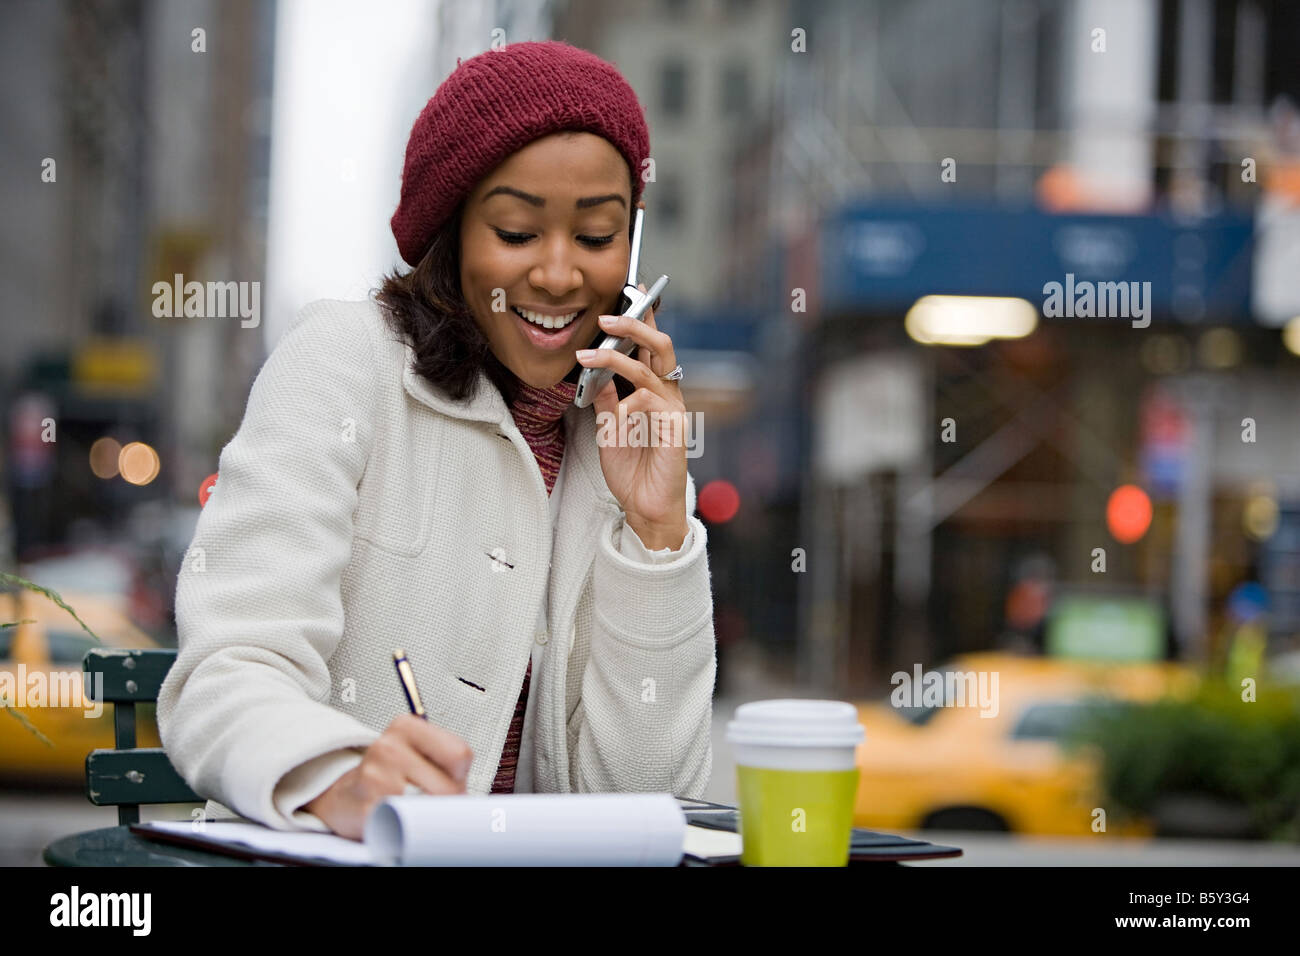 An attractive business woman talking on her cell phone while seated outdoors in the city Stock Photo